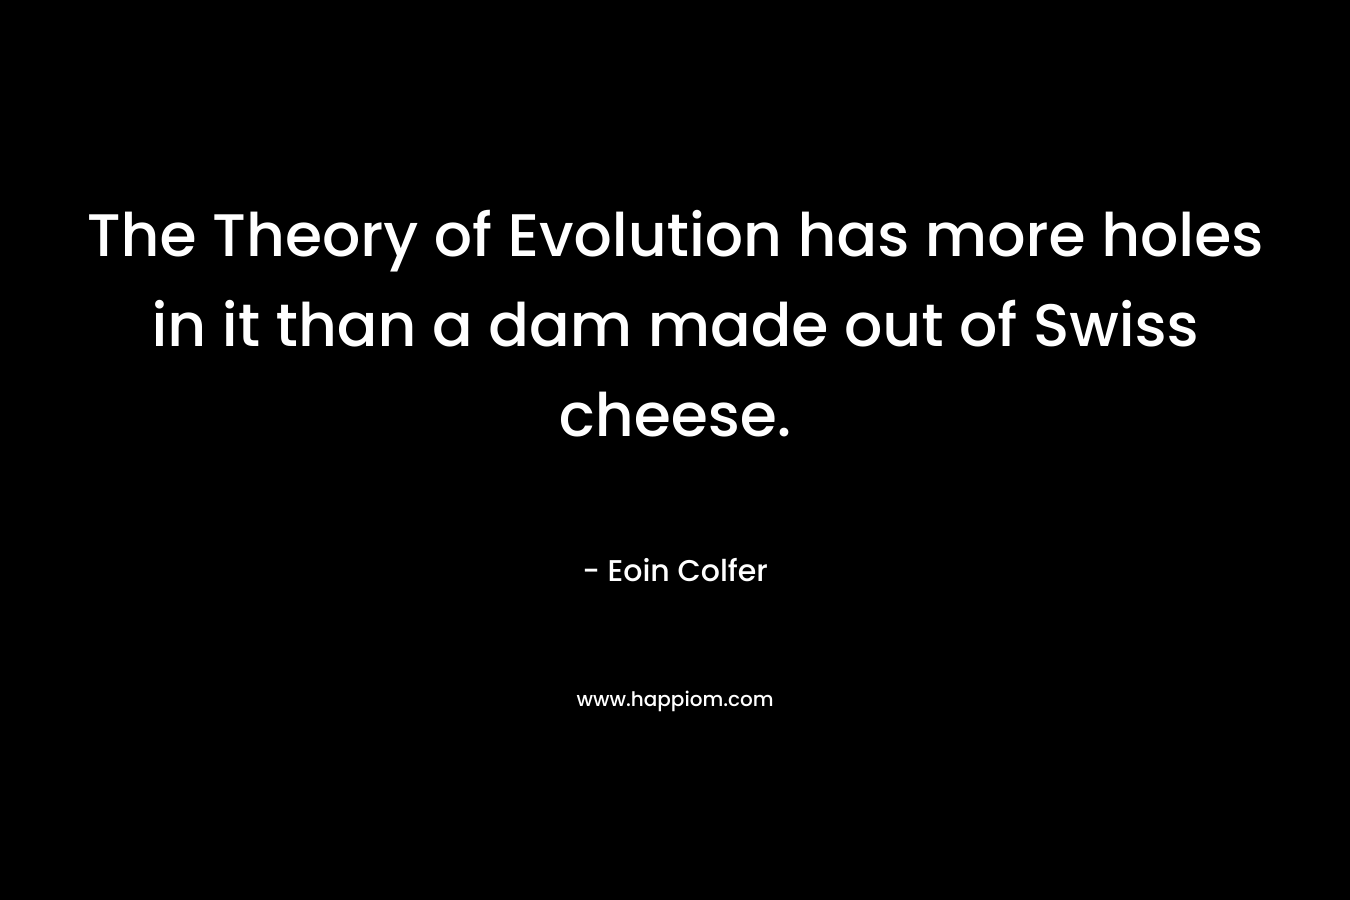 The Theory of Evolution has more holes in it than a dam made out of Swiss cheese. – Eoin Colfer